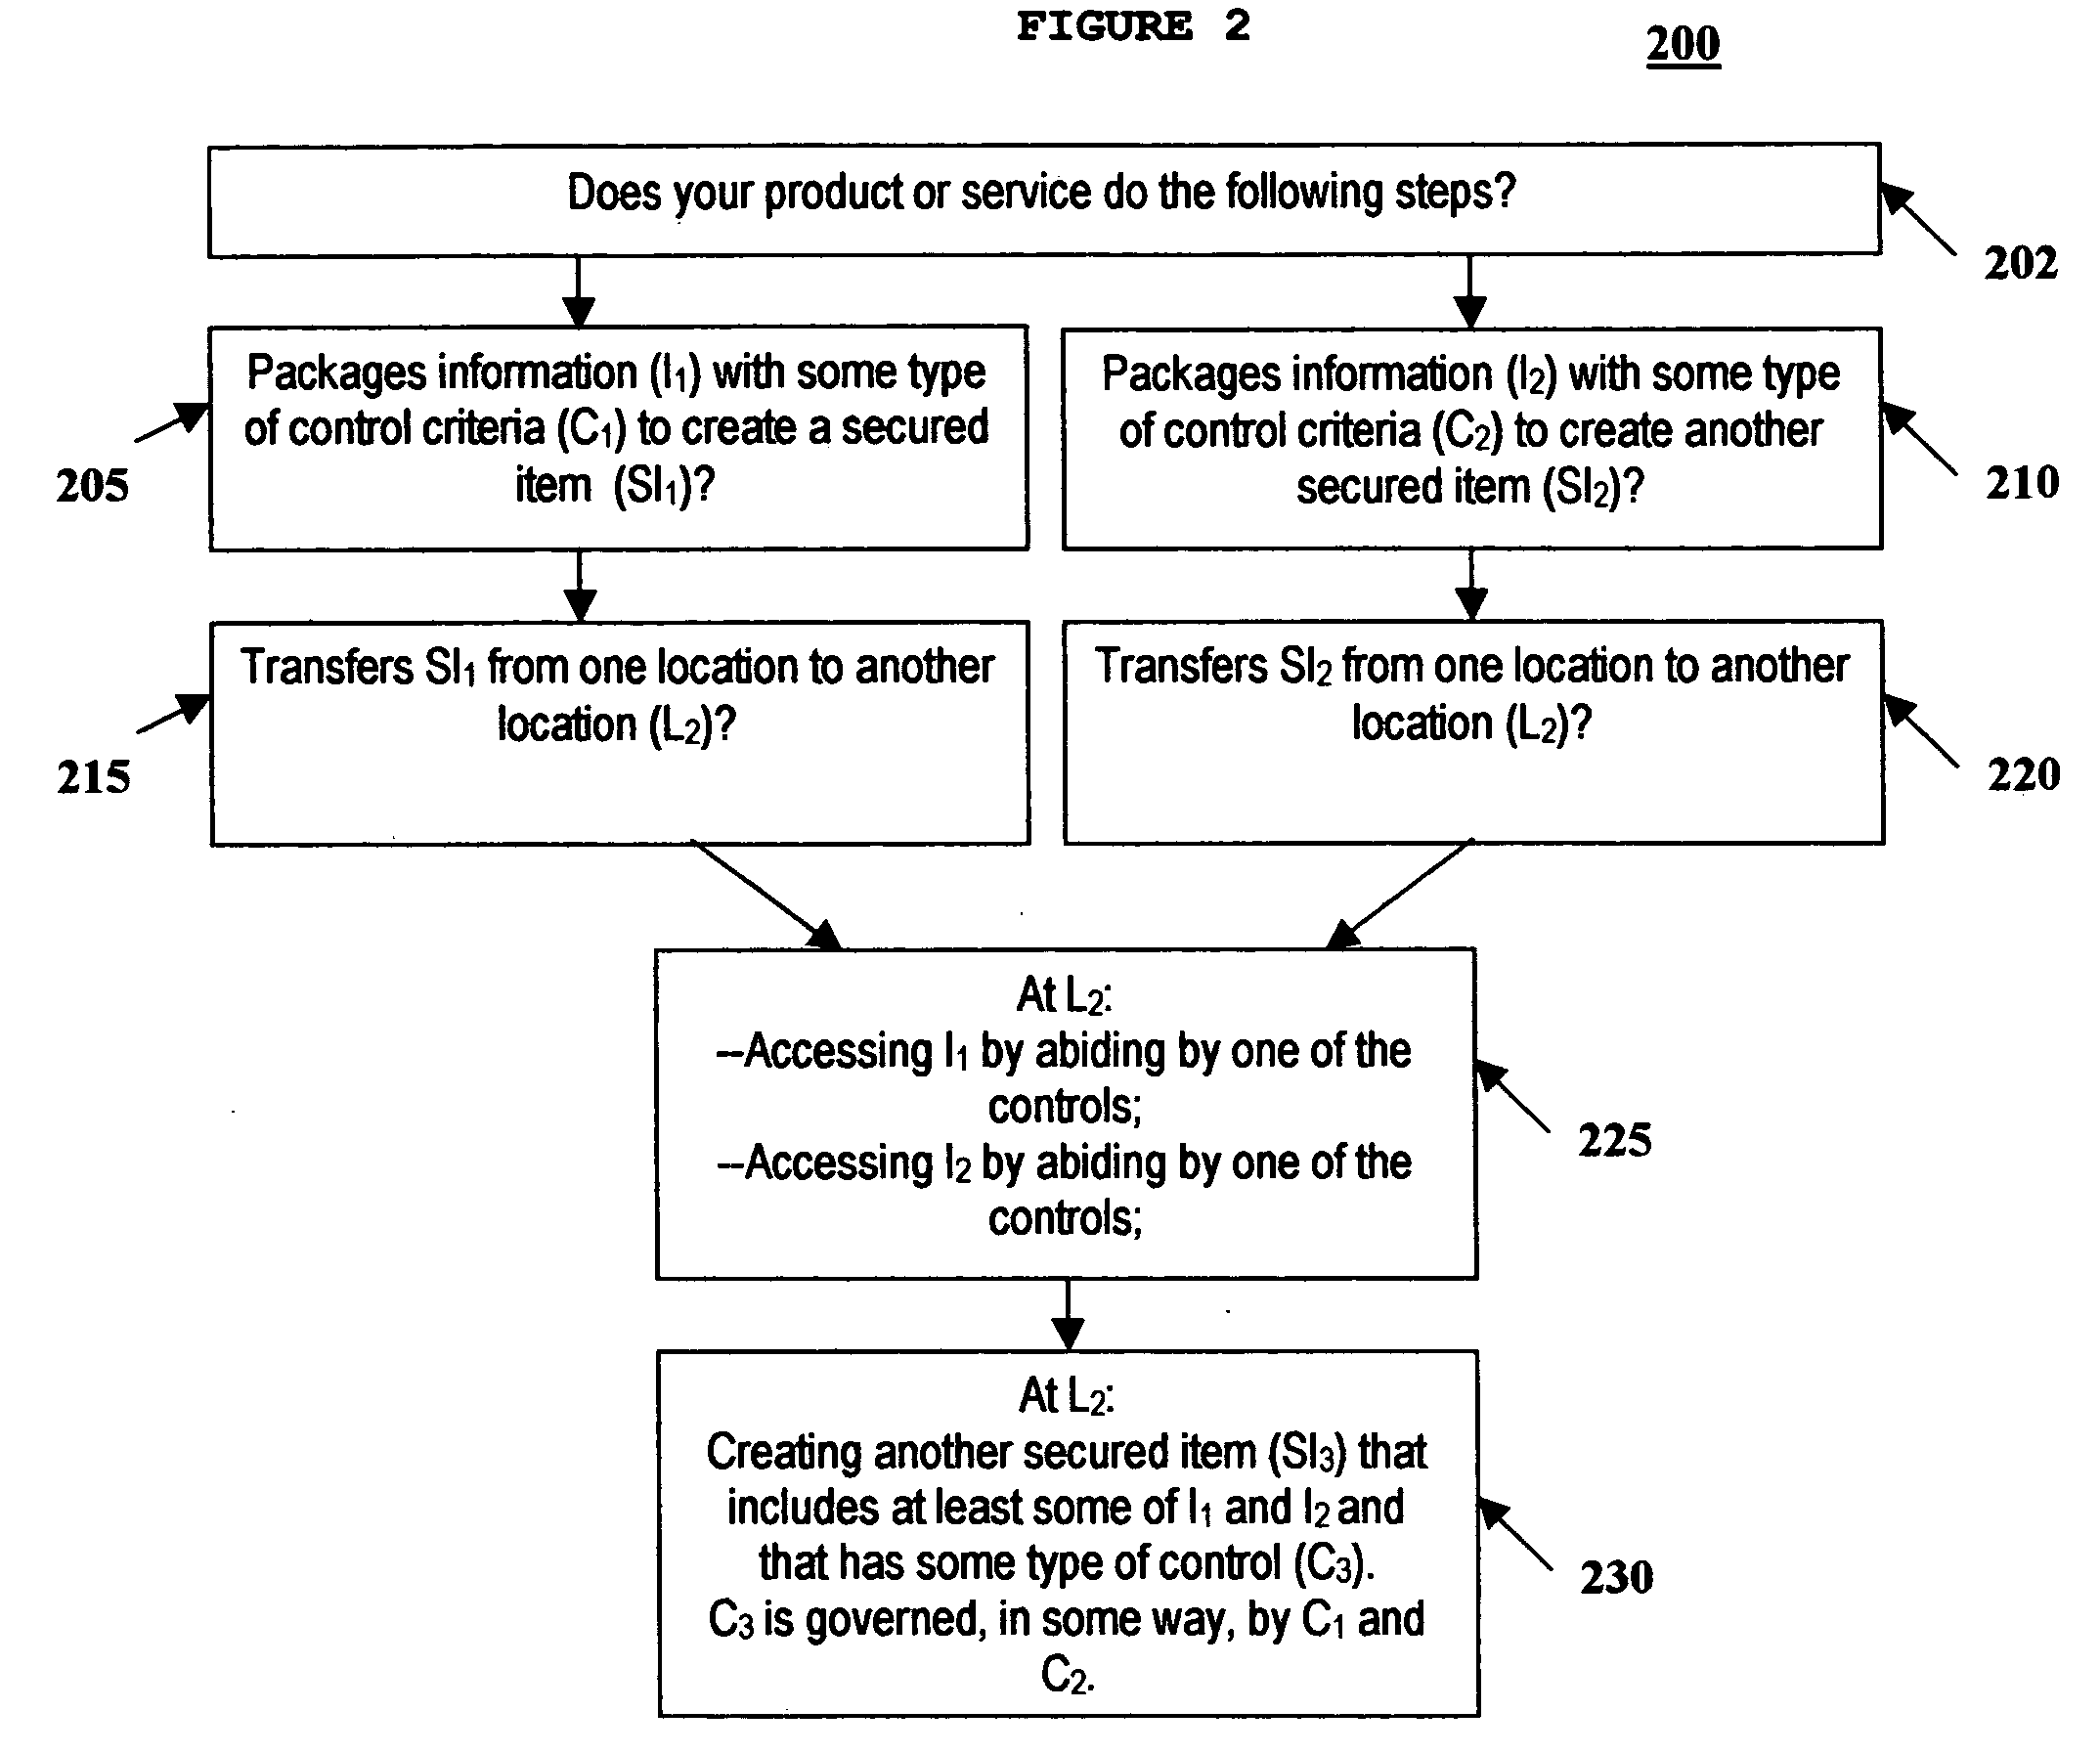 Systems and methods for evaluating information to identify, and act upon, intellectual property issues